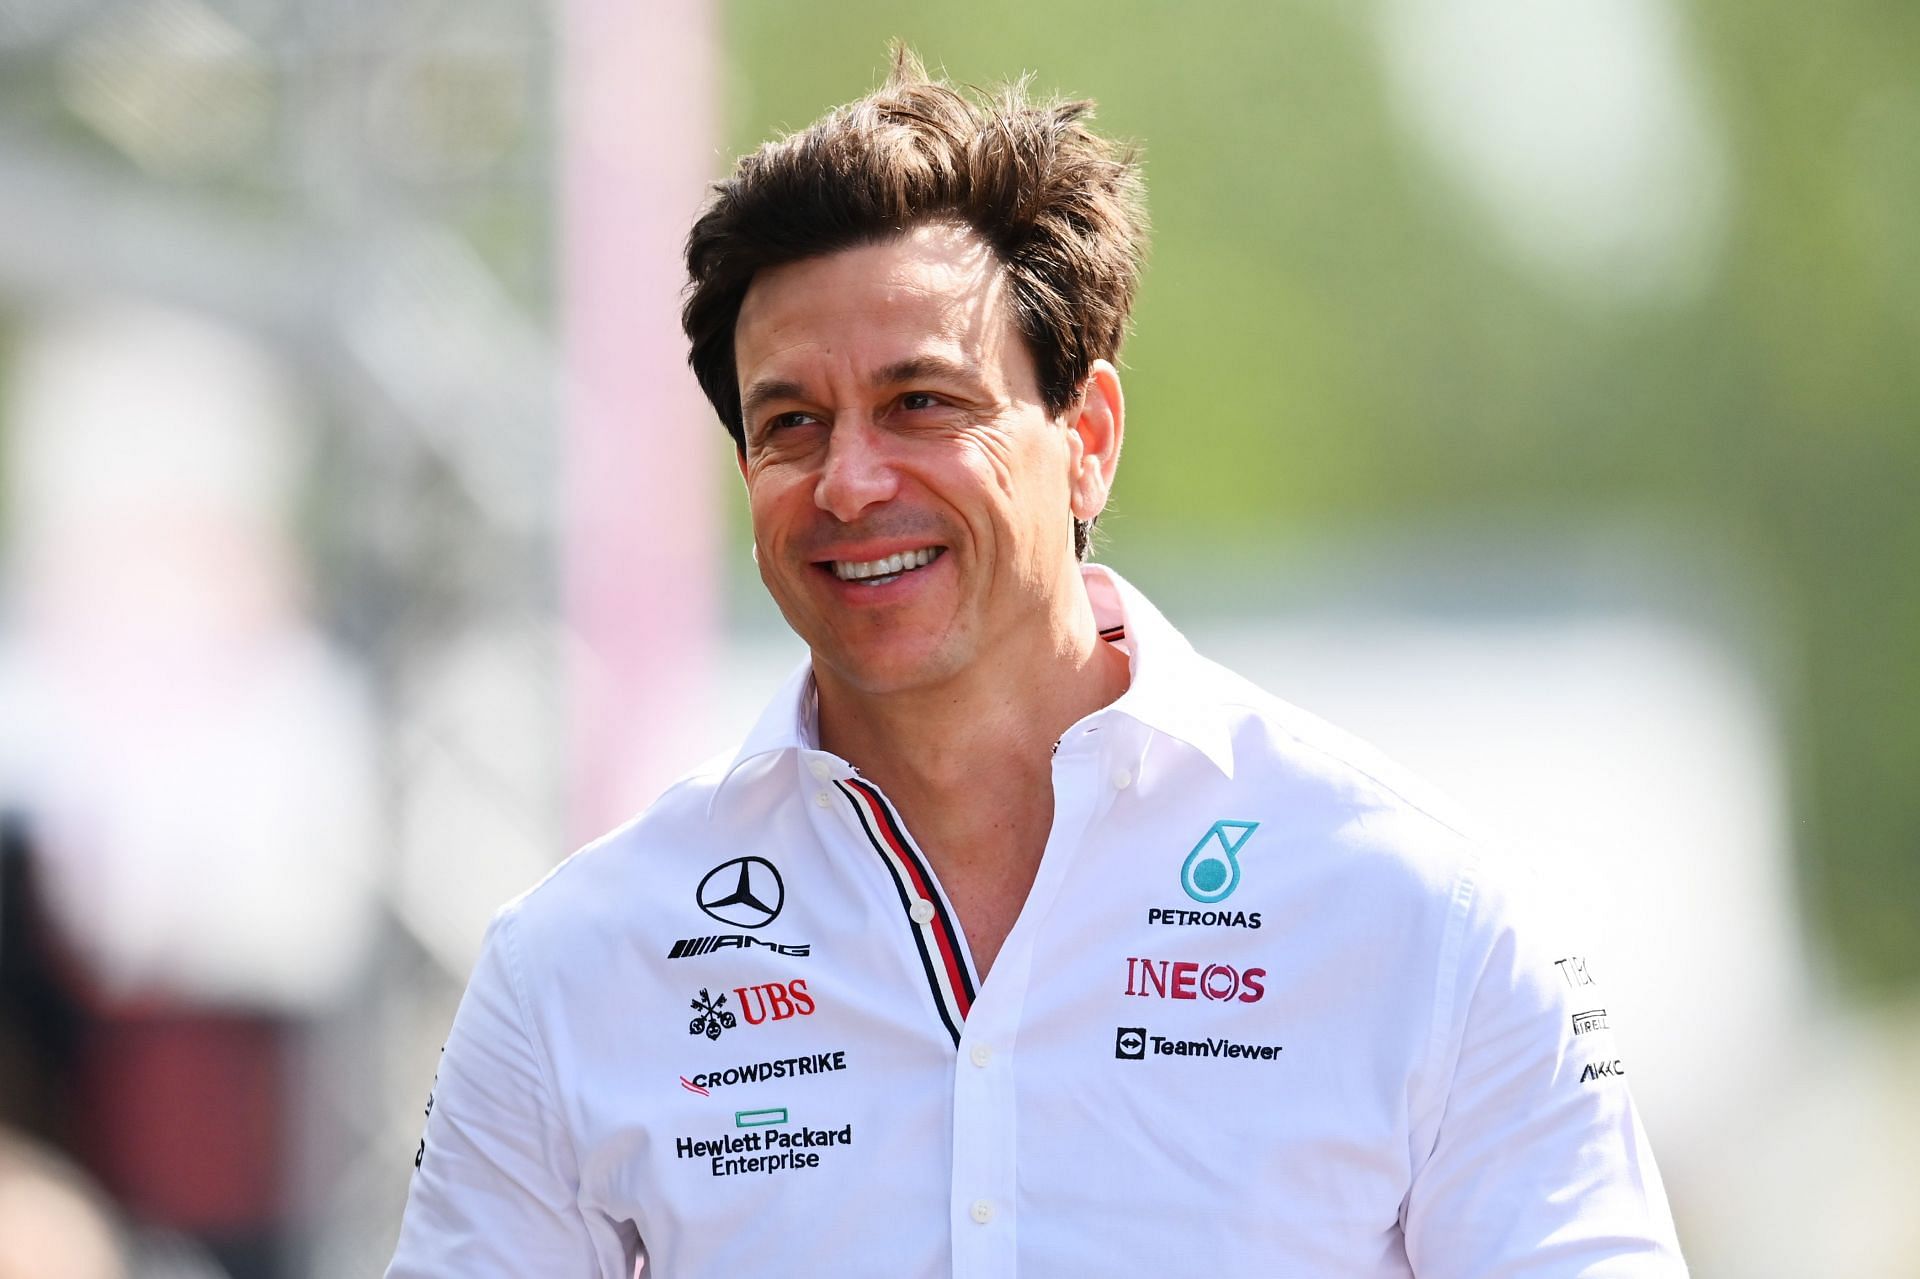 Mercedes GP Executive Director Toto Wolff walks in the Paddock prior to practice ahead of the F1 Grand Prix of Emilia Romagna at Autodromo Enzo e Dino Ferrari on April 23, 2022, in Imola, Italy (Photo by Dan Mullan/Getty Images)